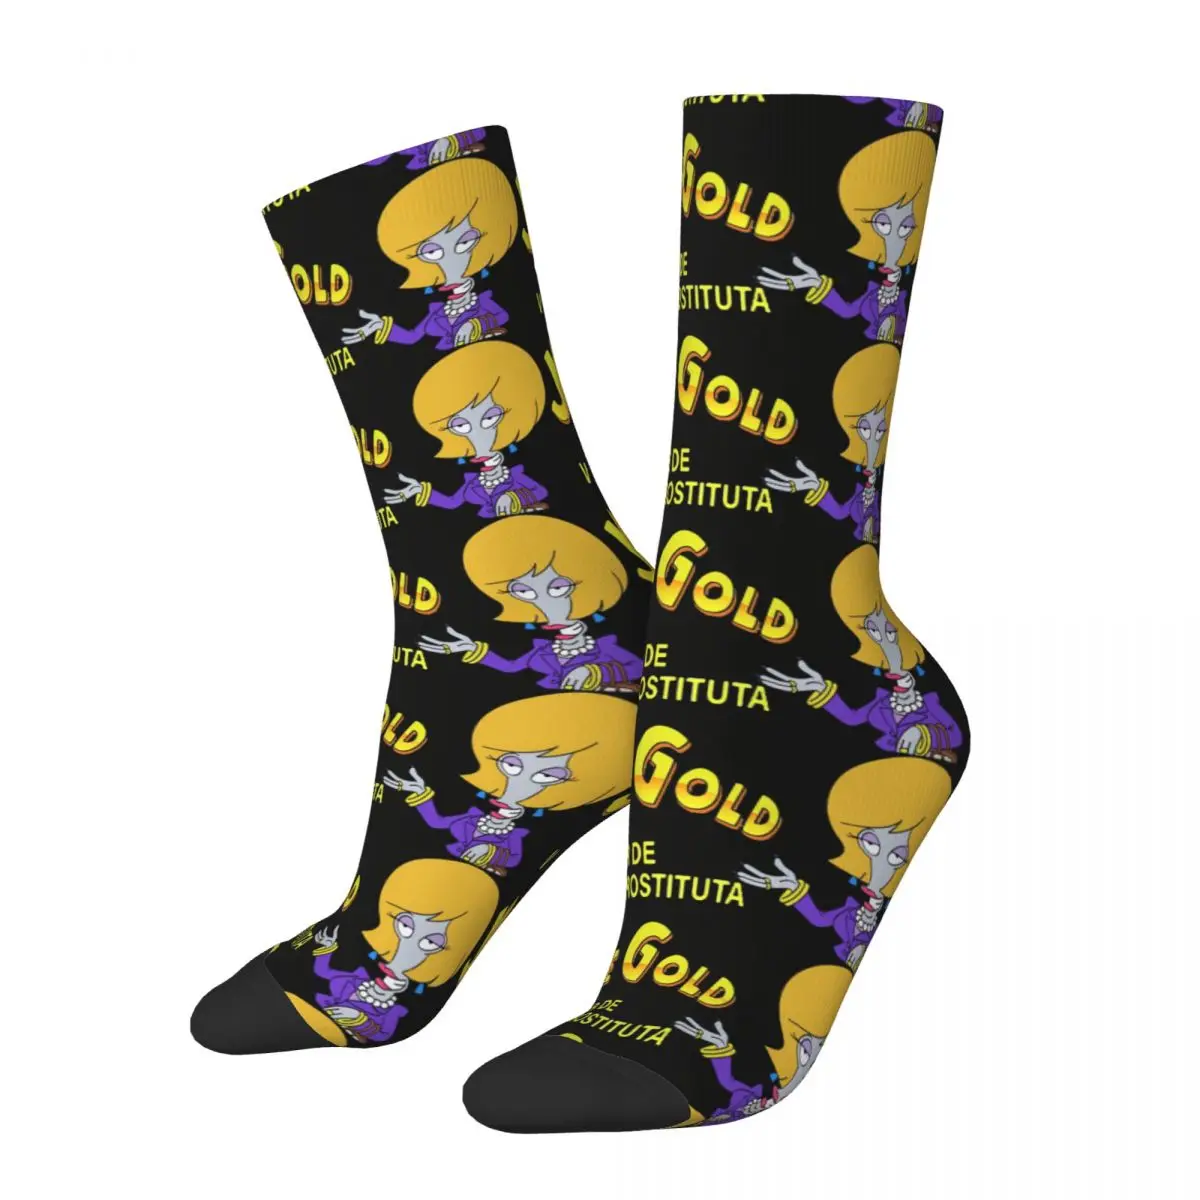 

Funny Crazy Sock for Men Jeannie Gold Hip Hop Vintage The Americans Roger Alien Cartoon Happy Quality Pattern Printed Boys Sock